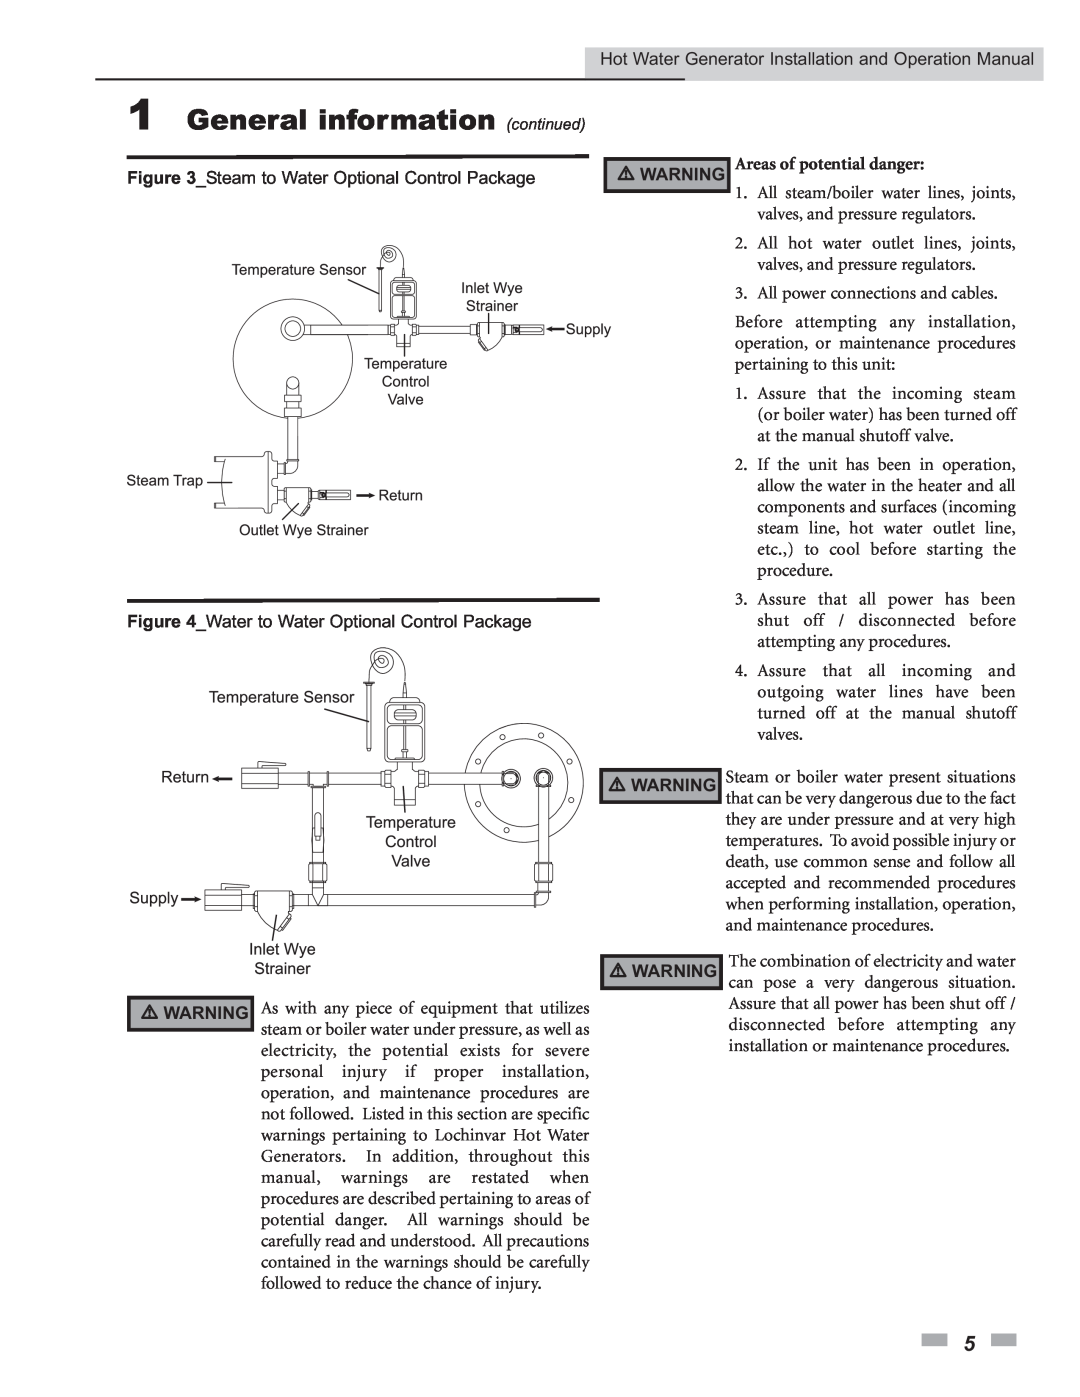 Lochinvar Hot Water Generator operation manual 1General information continued, Steam to Water Optional Control Package 